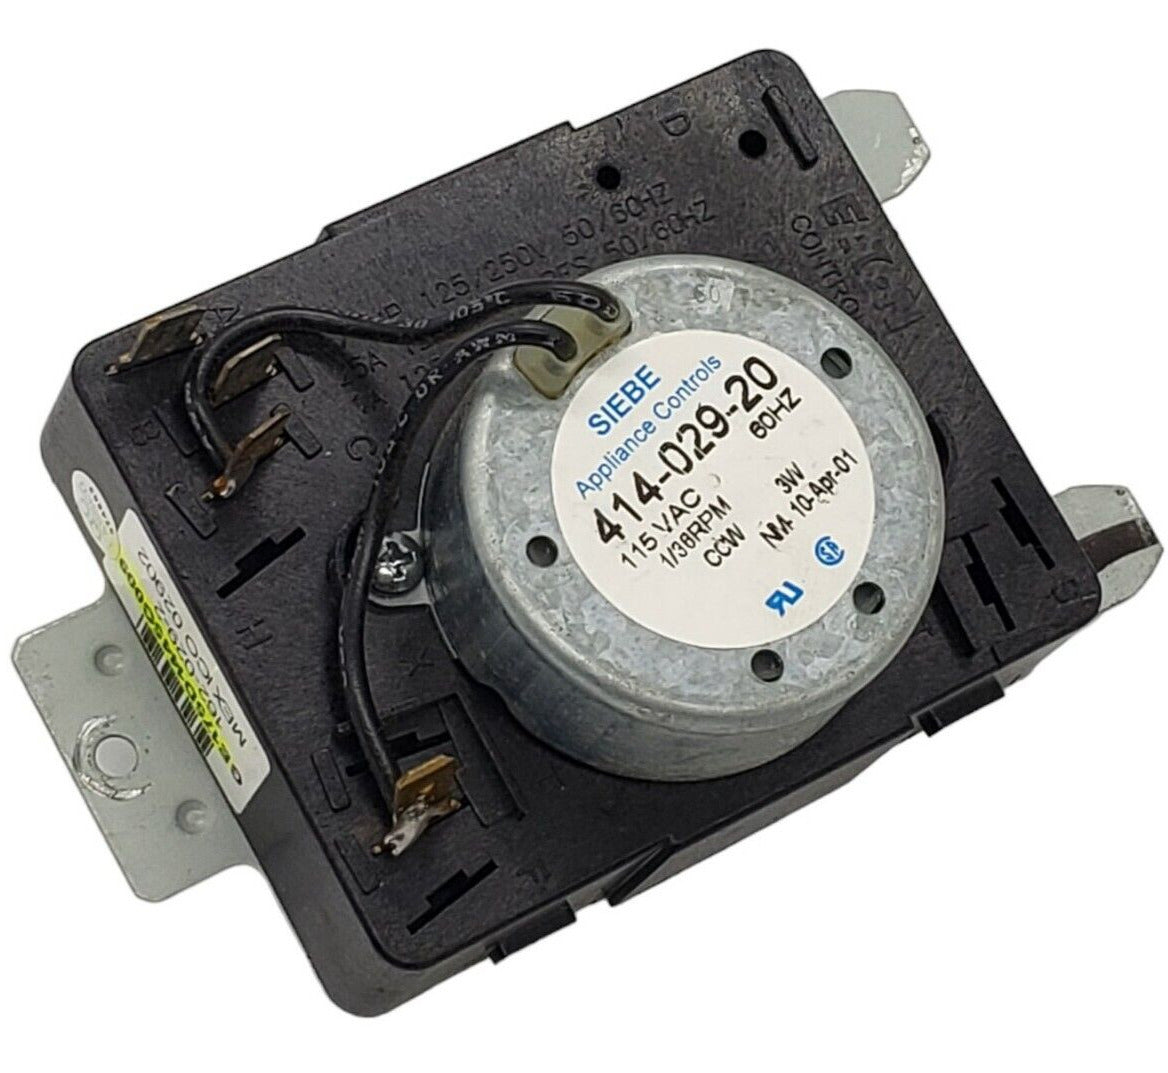 OEM Replacement for GE Dryer Timer 175D1445G009